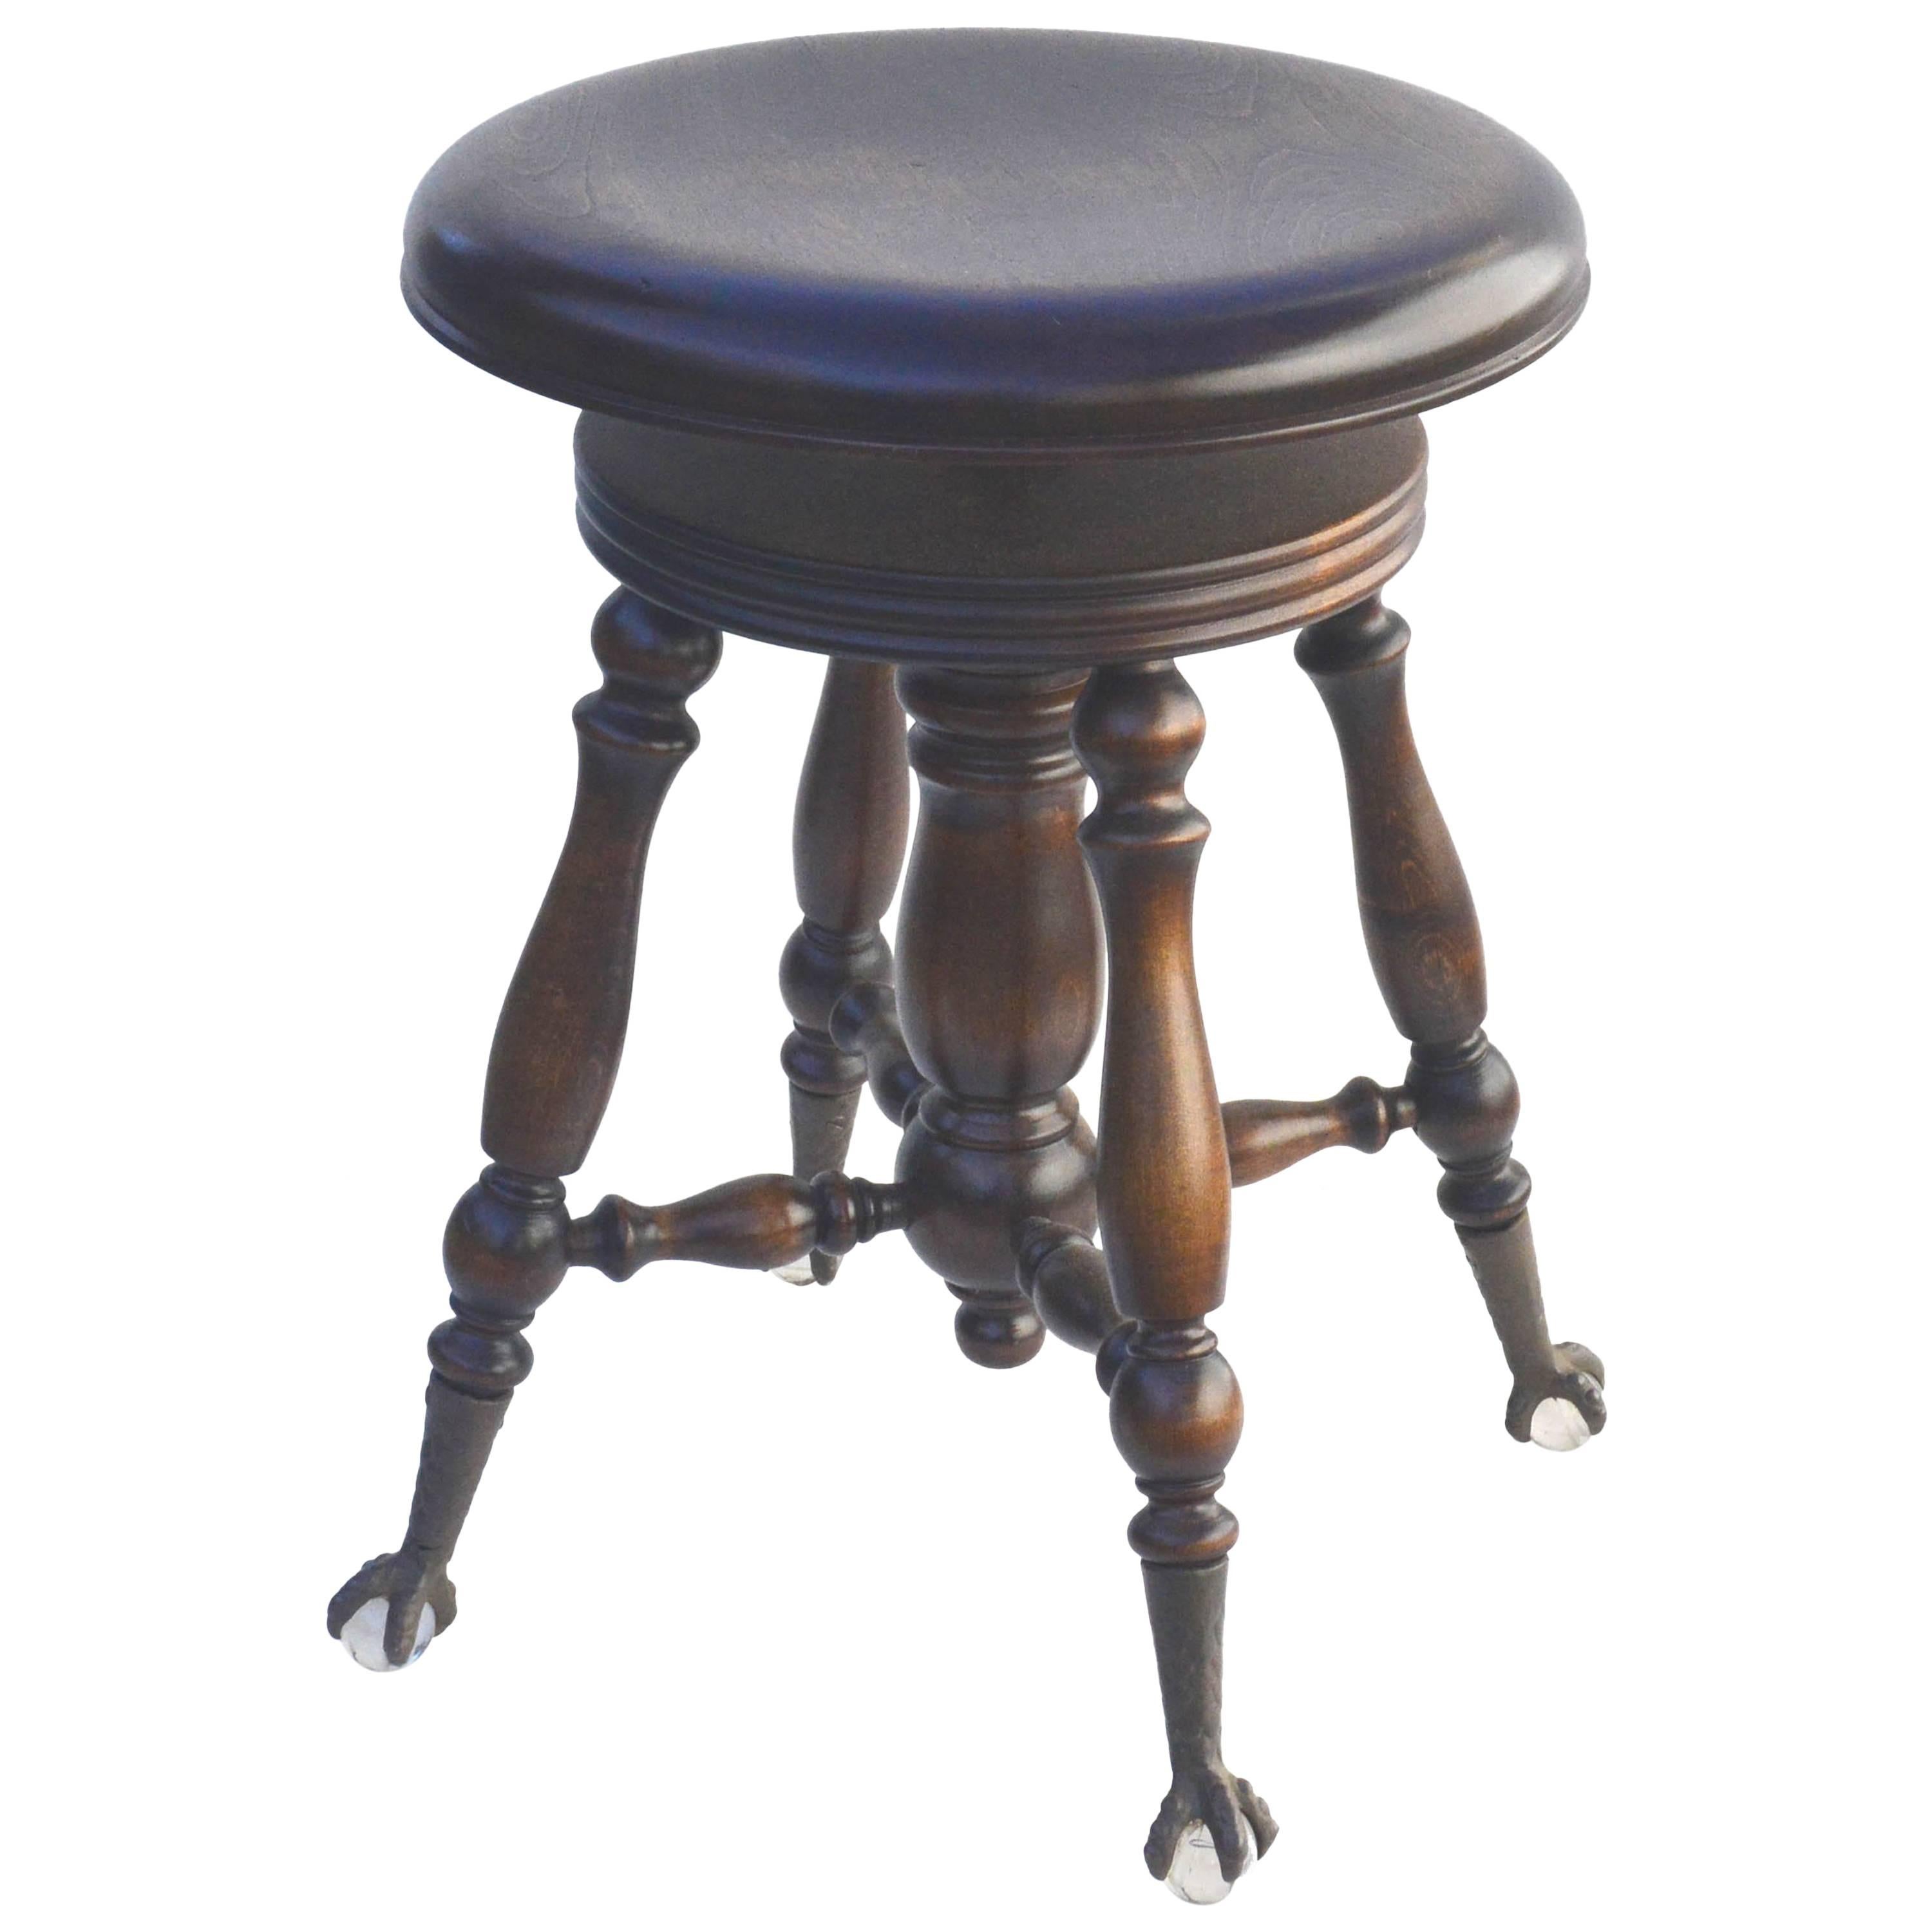 Late 19th Century Piano Stool with Claw and Ball Glass Feet